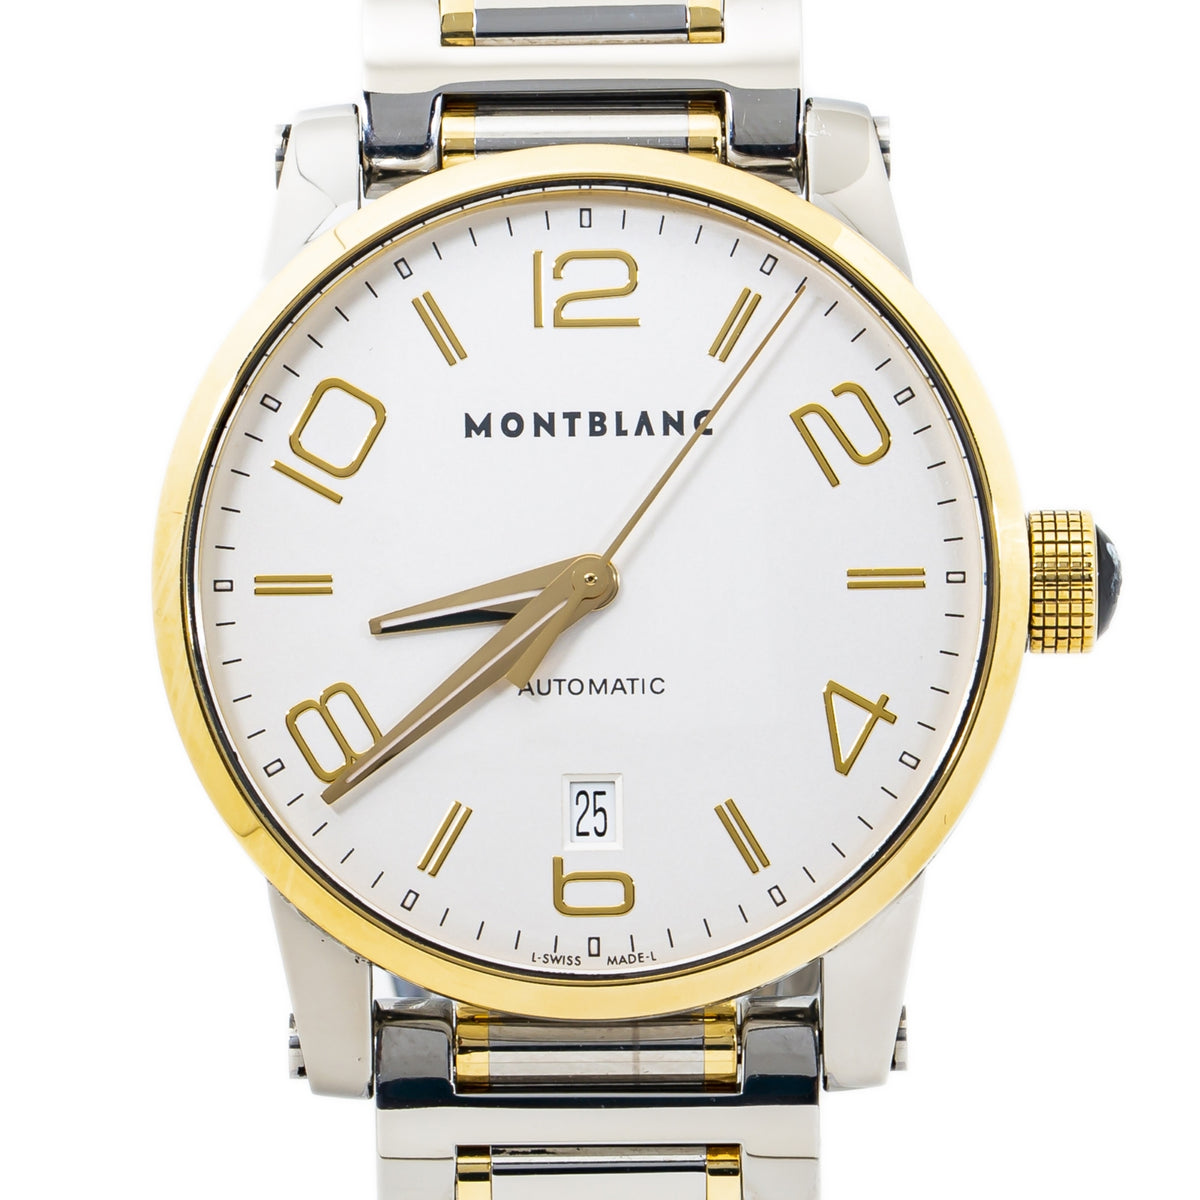 Montblanc TimeWalker 7210 StainlessSteel Gold TwoTone Automatic Men's Watch 39mm